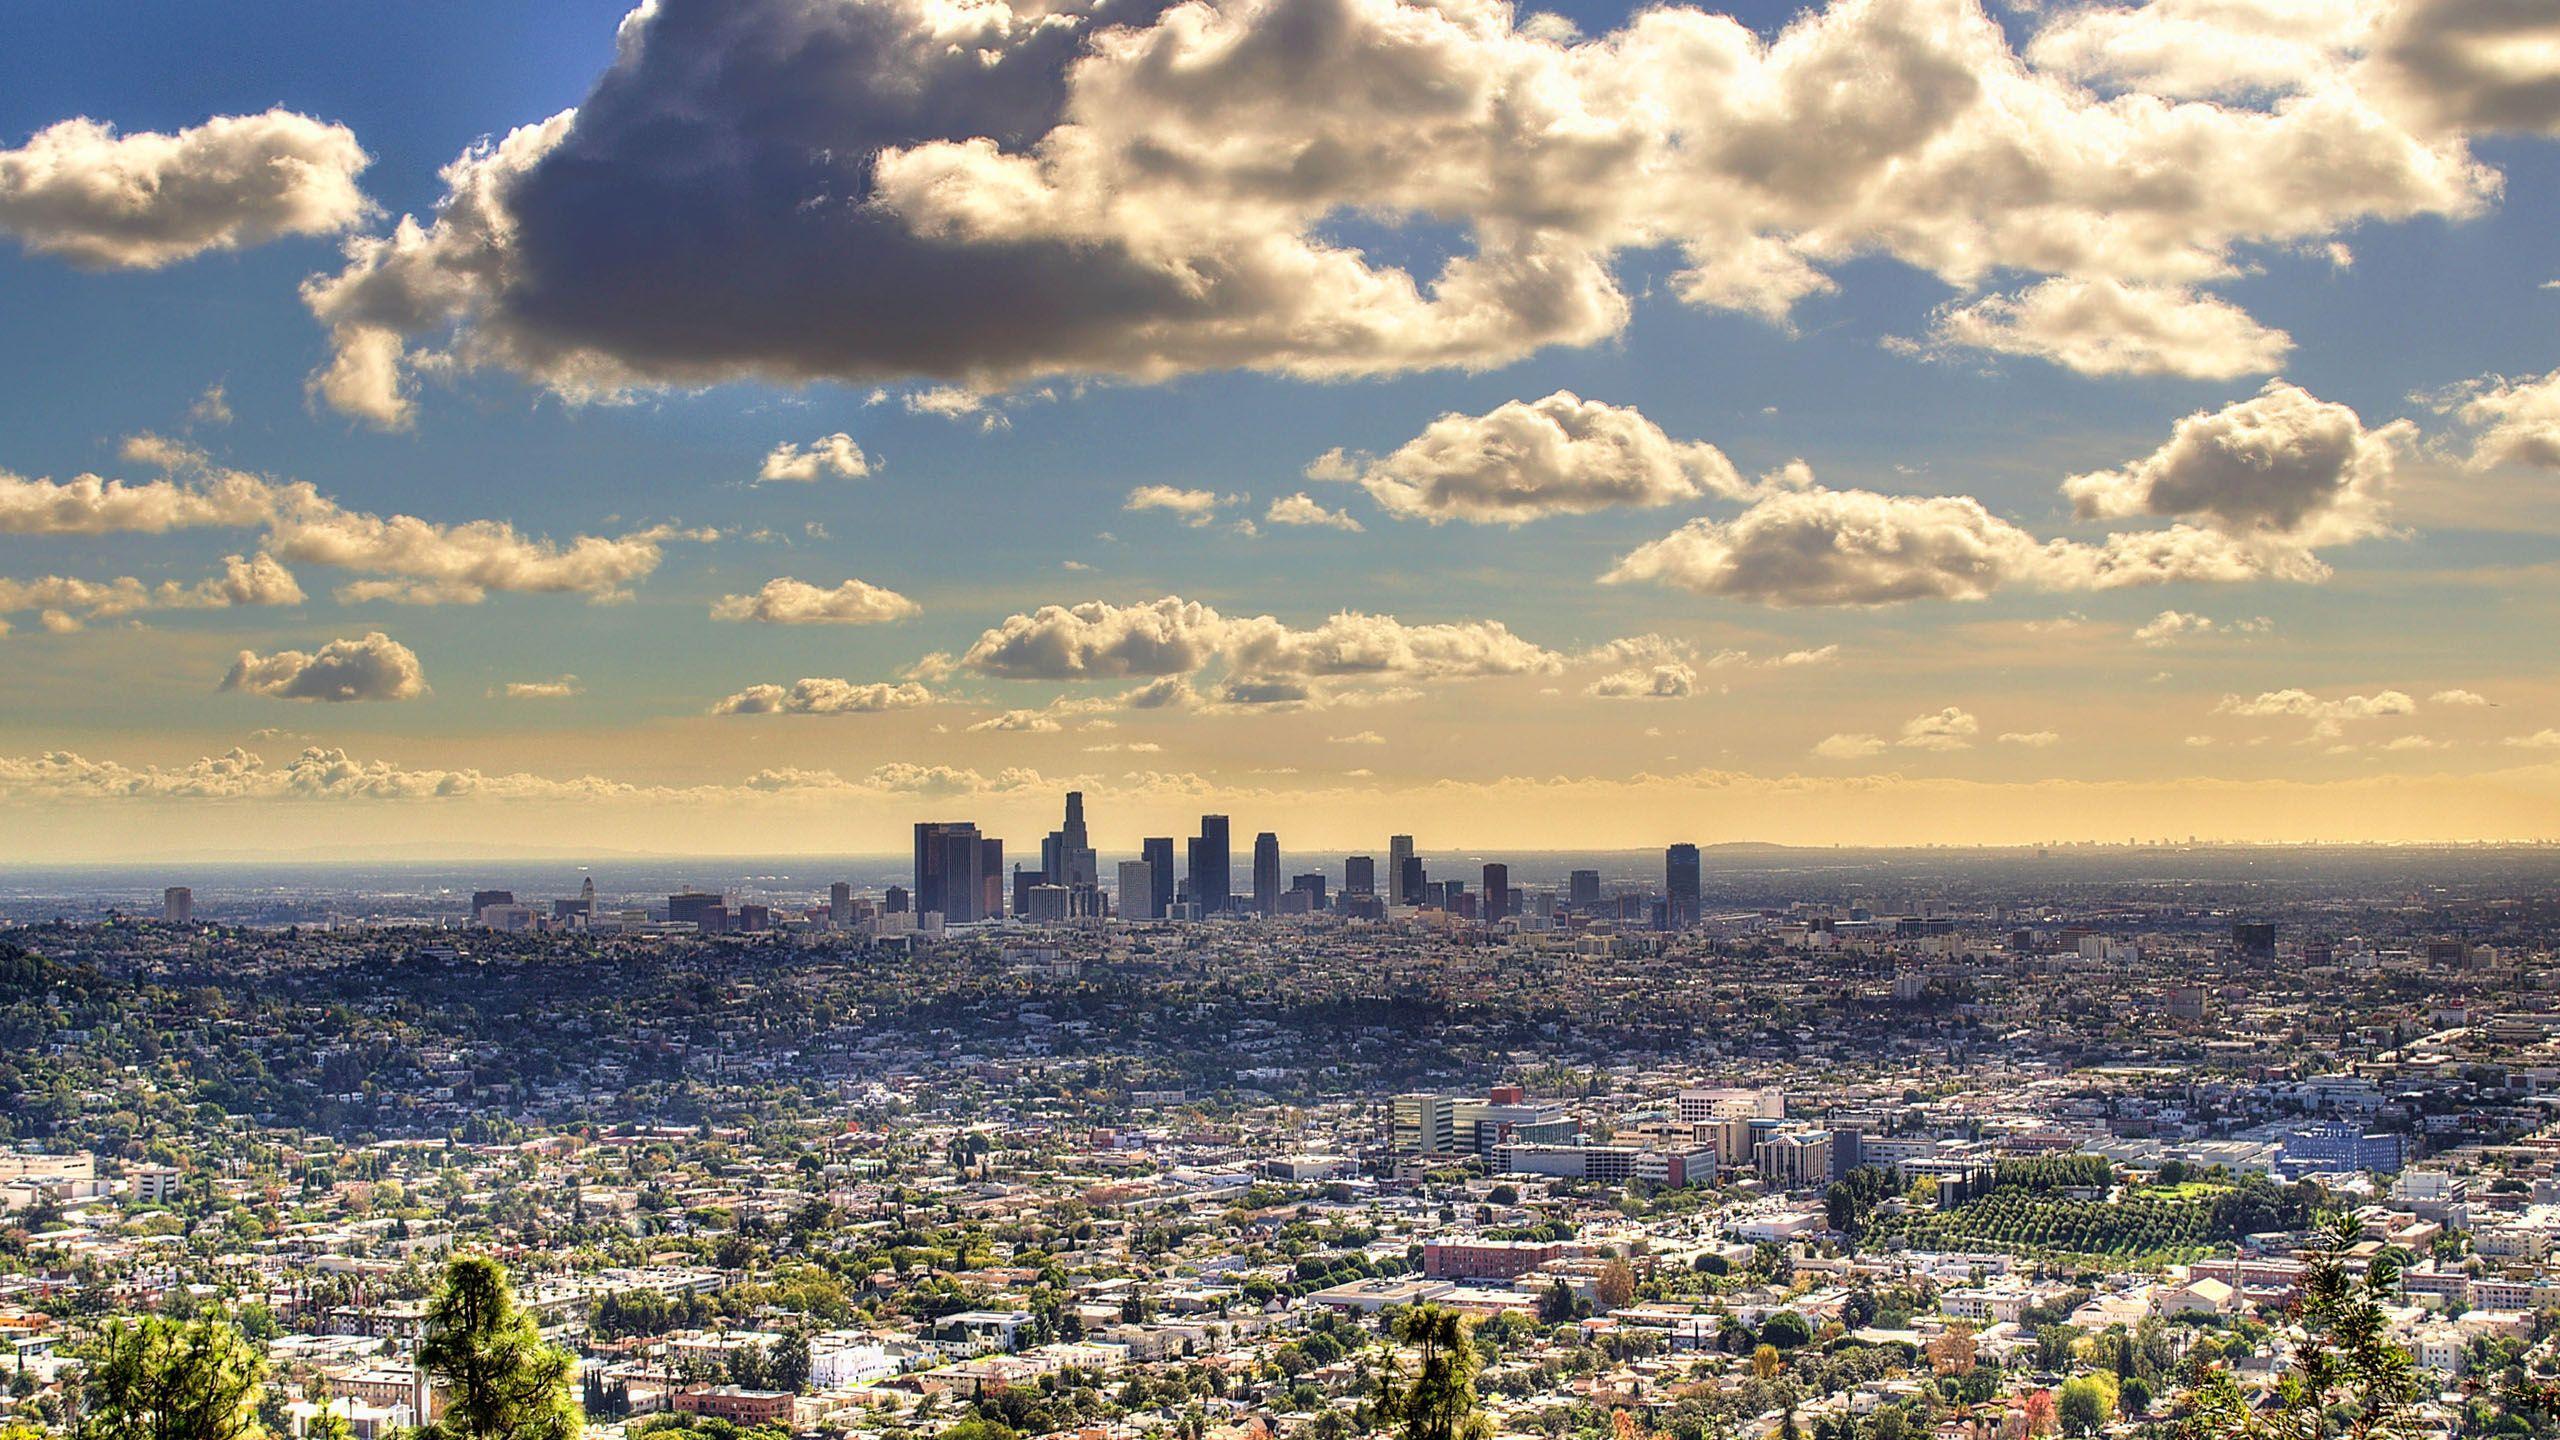 42 High Definition Los Angeles Wallpapers Image In 3D For Download.